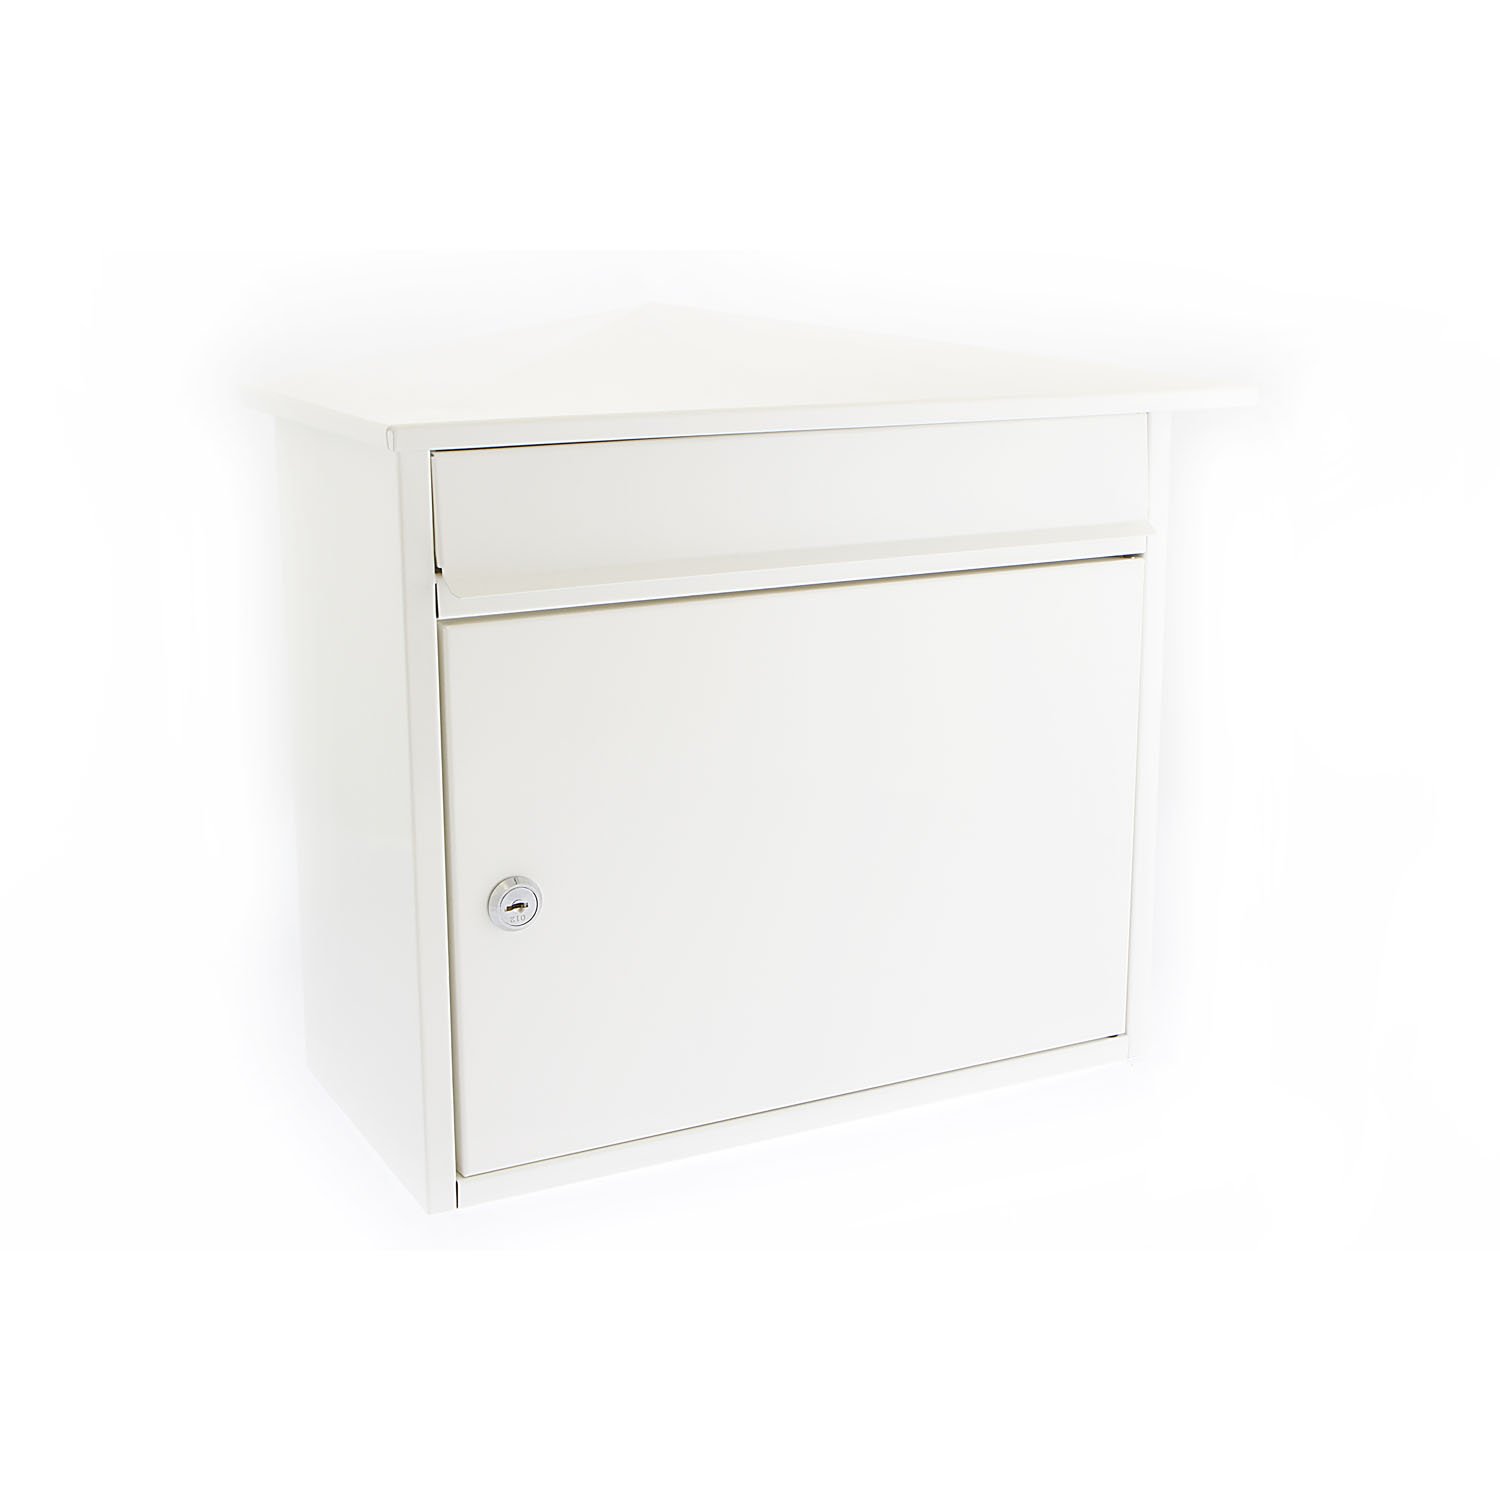 G2 By Sterling Mersey Post Box in White